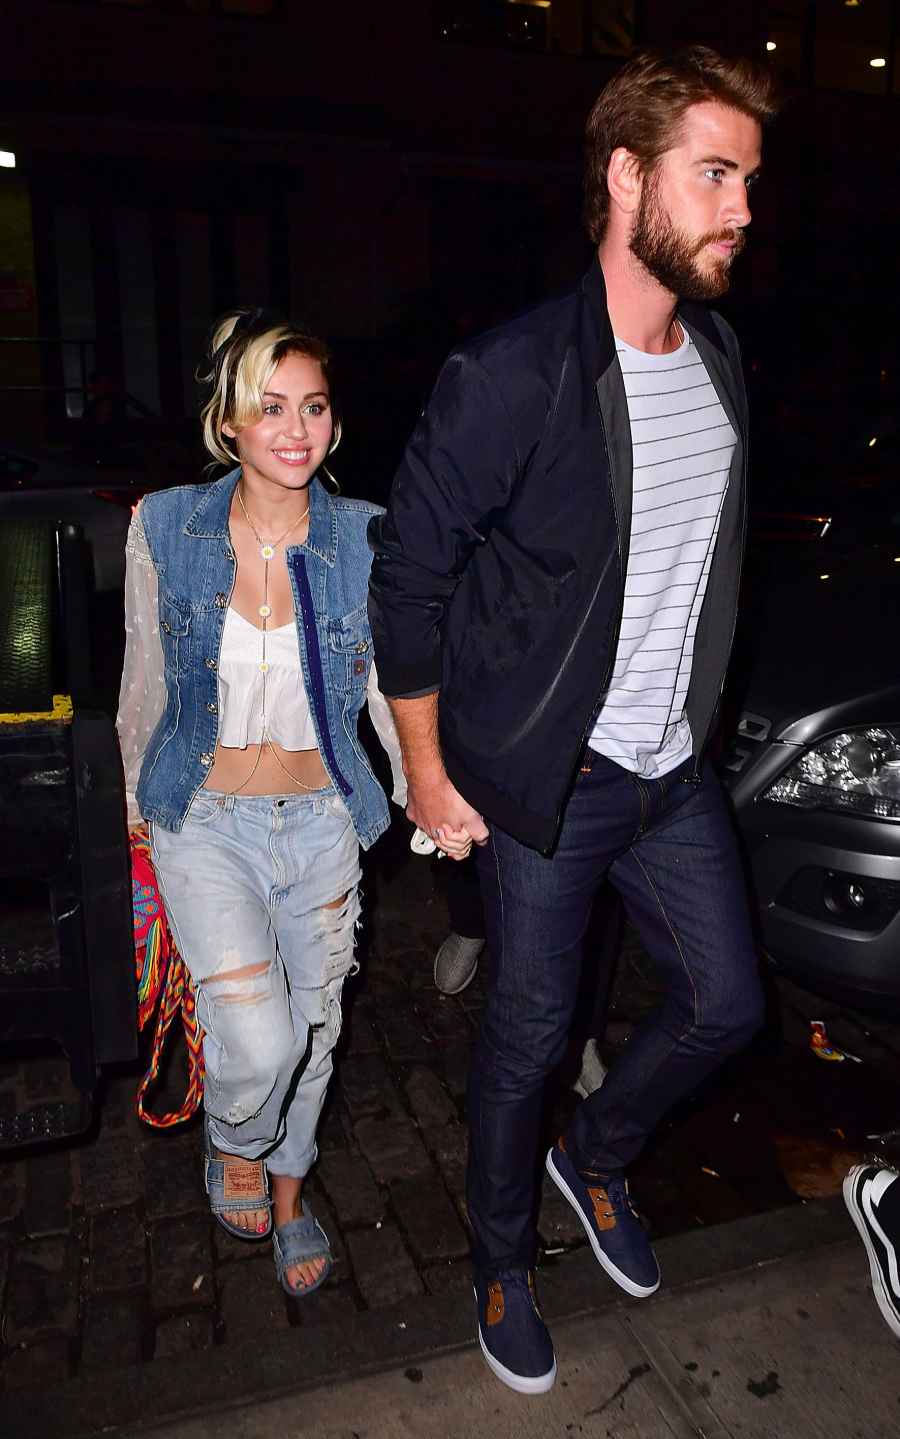 Miley Cyrus and Liam Hemsworth’s Most Romantic Quotes About Each Other